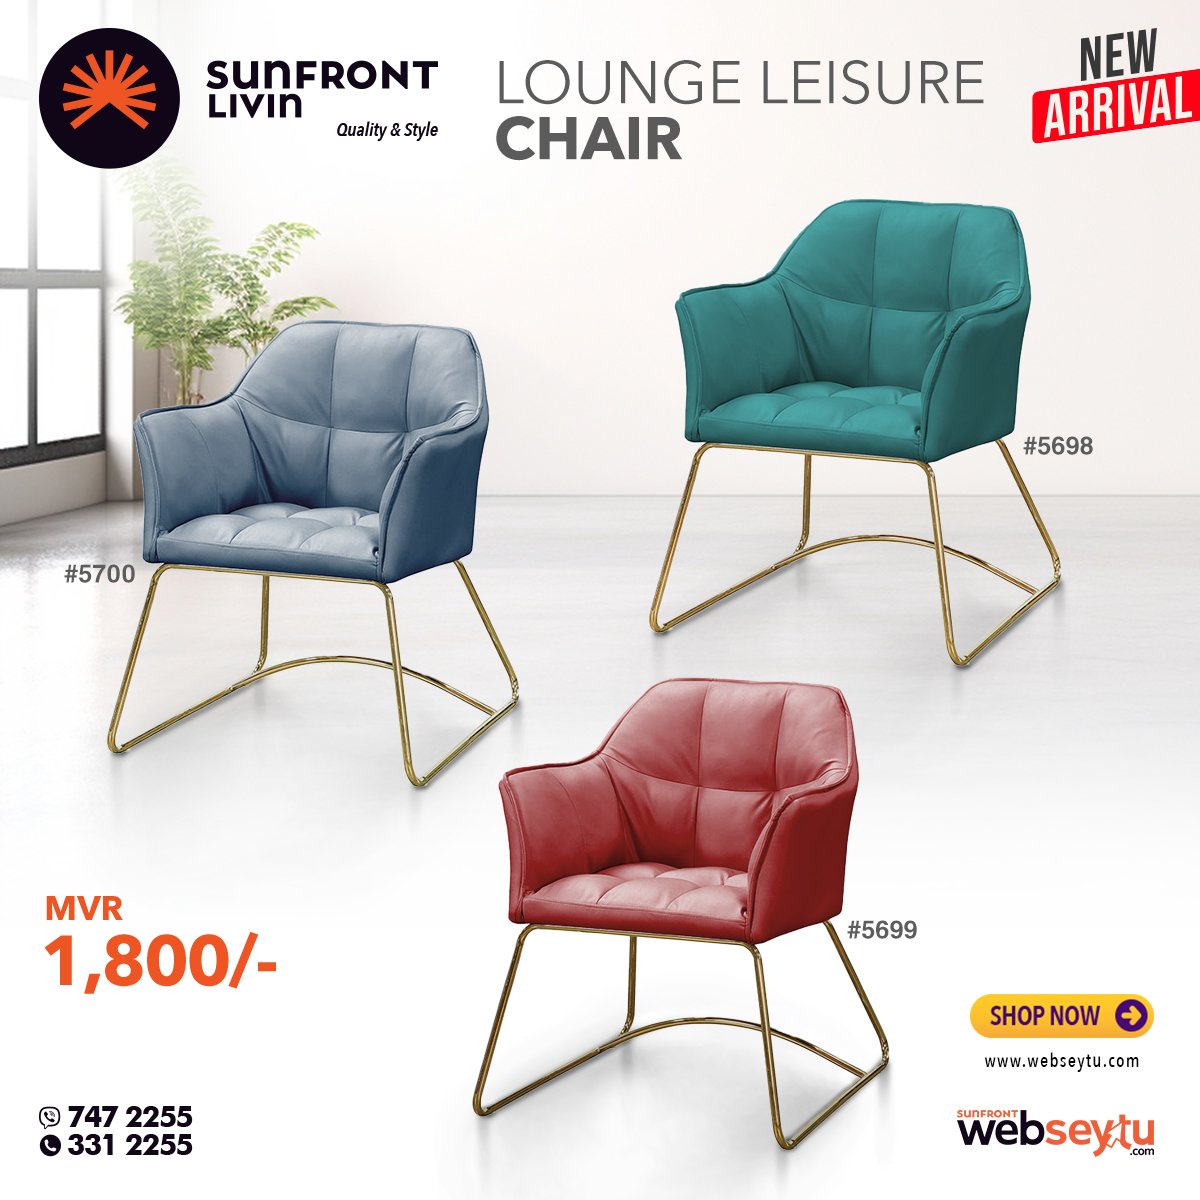 Embrace relaxation in style with our sleek Lounge Leisure Chair!
Buy Online: bit.ly/3Uv7I6A

SunFront Livin
Tel: 3312255
Hotline: 7472255

#sofa #lounge #leisure #modern #style #sunfront #funituremaldives #furniture #fabricsofa #qualityandstyle #singleseat #accentchair